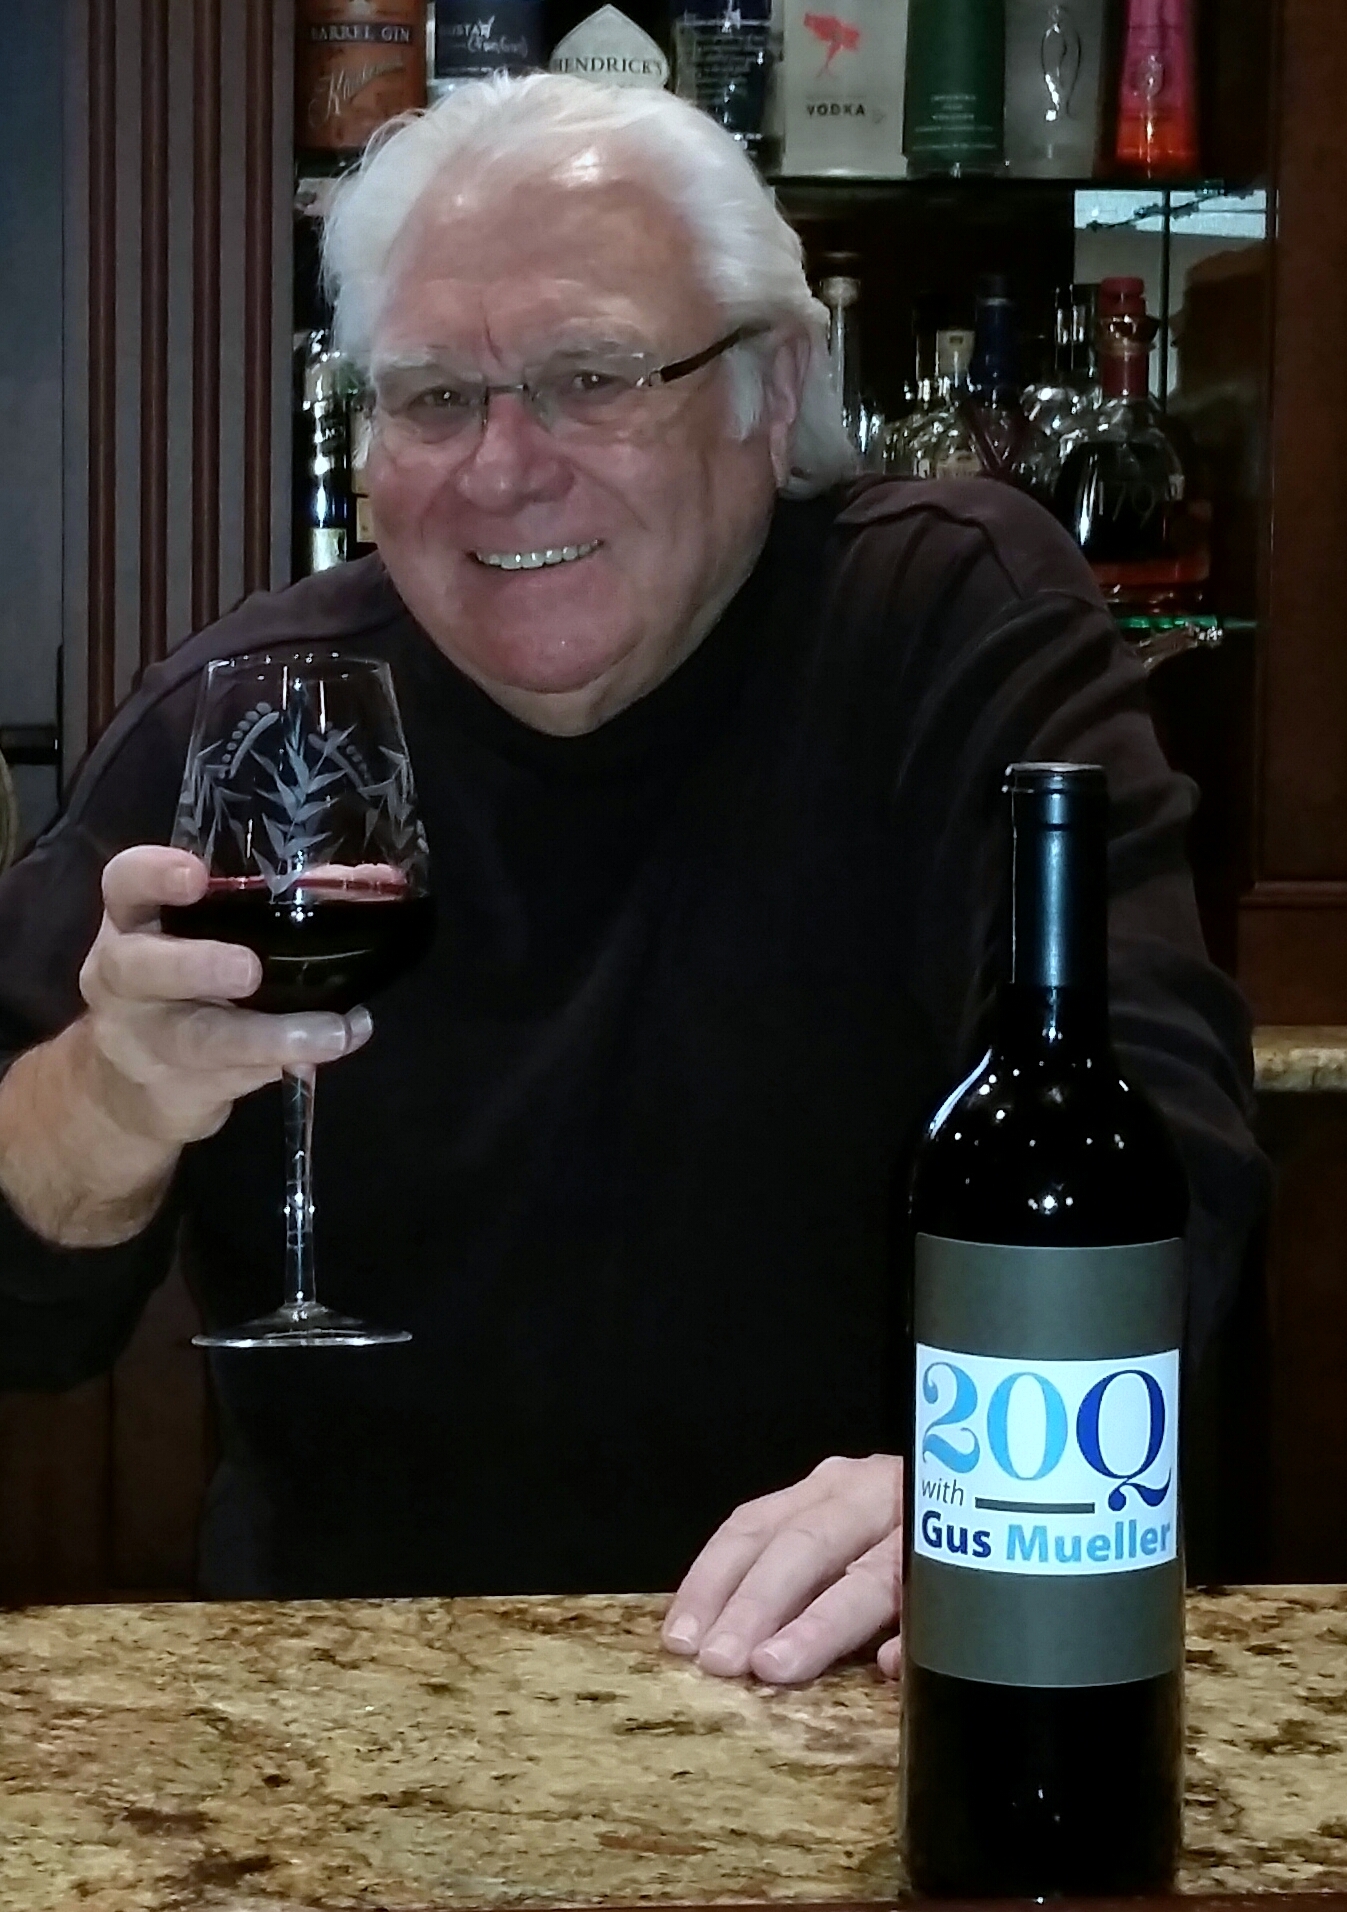 Gus Mueller toasting with a glass of red wine